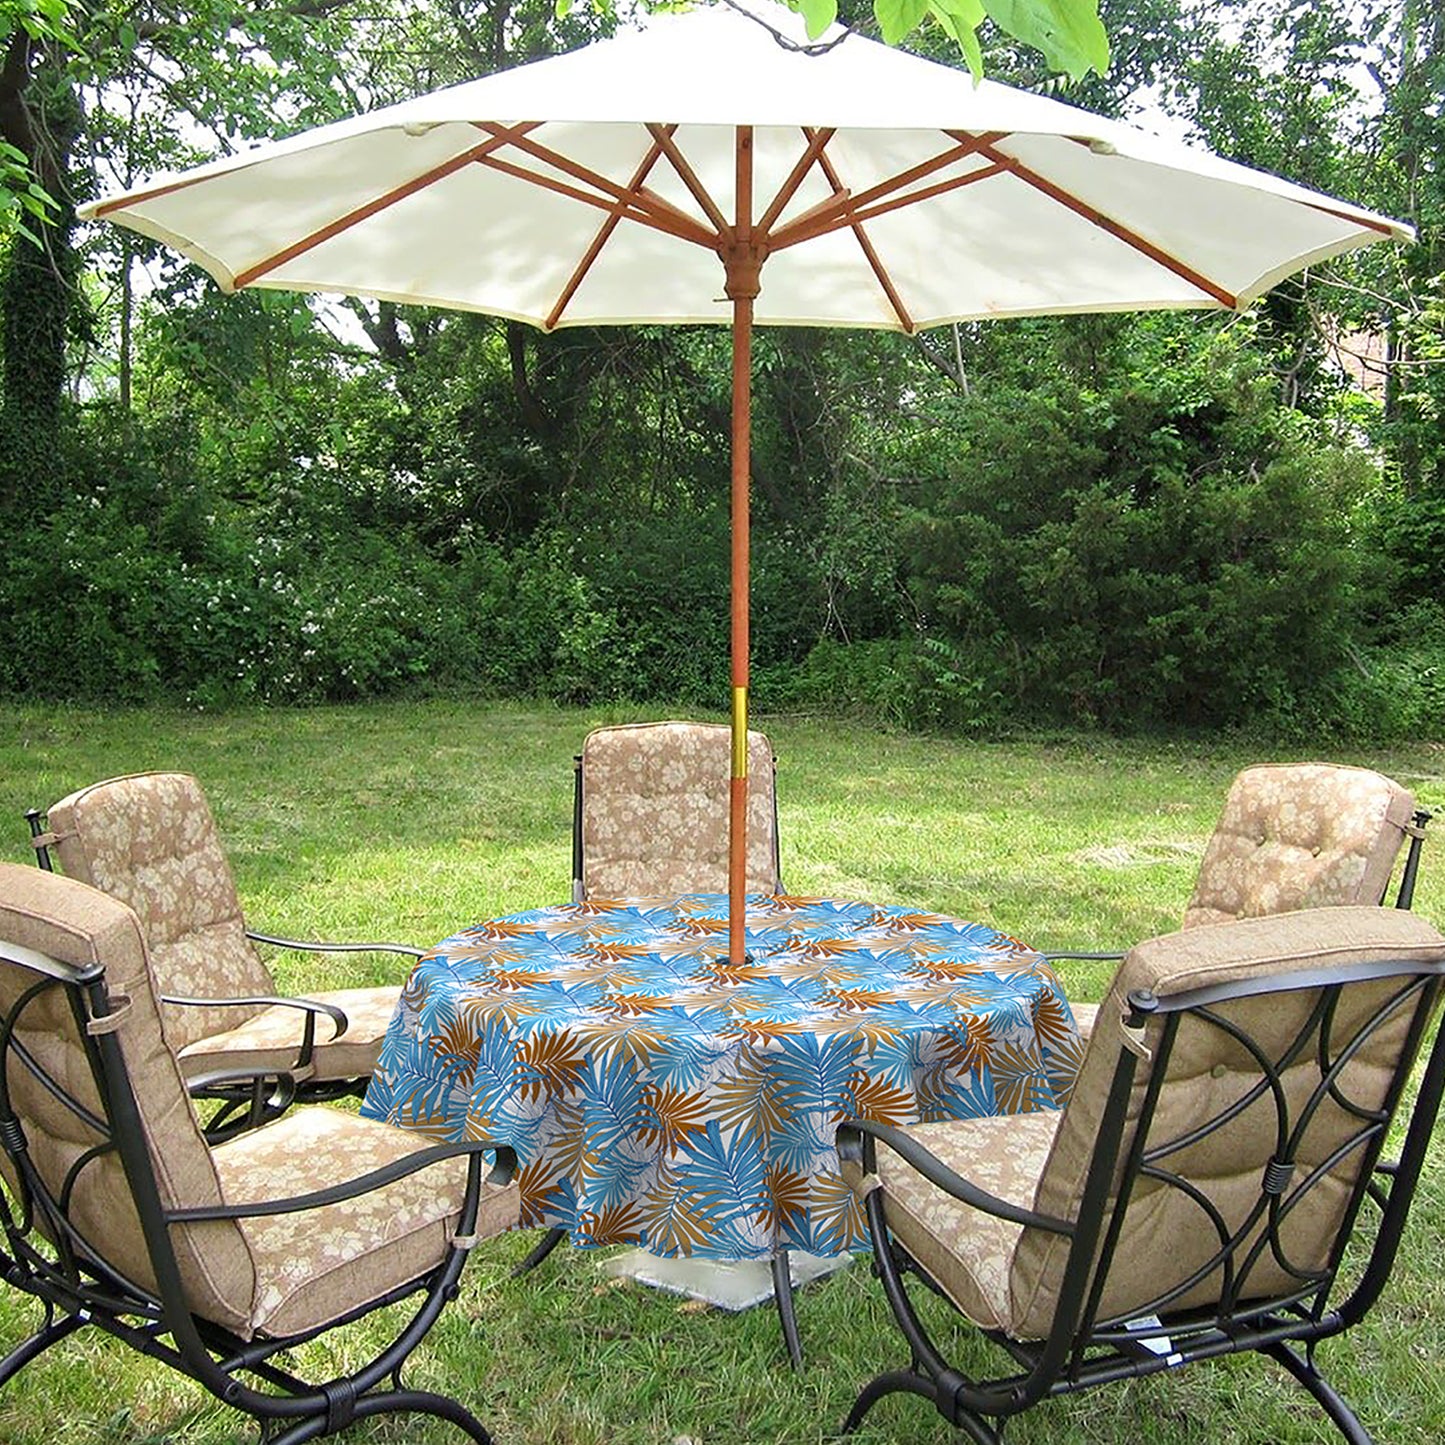 Melody Elephant Outdoor/Indoor Round Tablecloth with Umbrella Hole Zipper, Decorative Circular Table Cover for Home Garden, 60 Inch, Piermont Leaves Blue